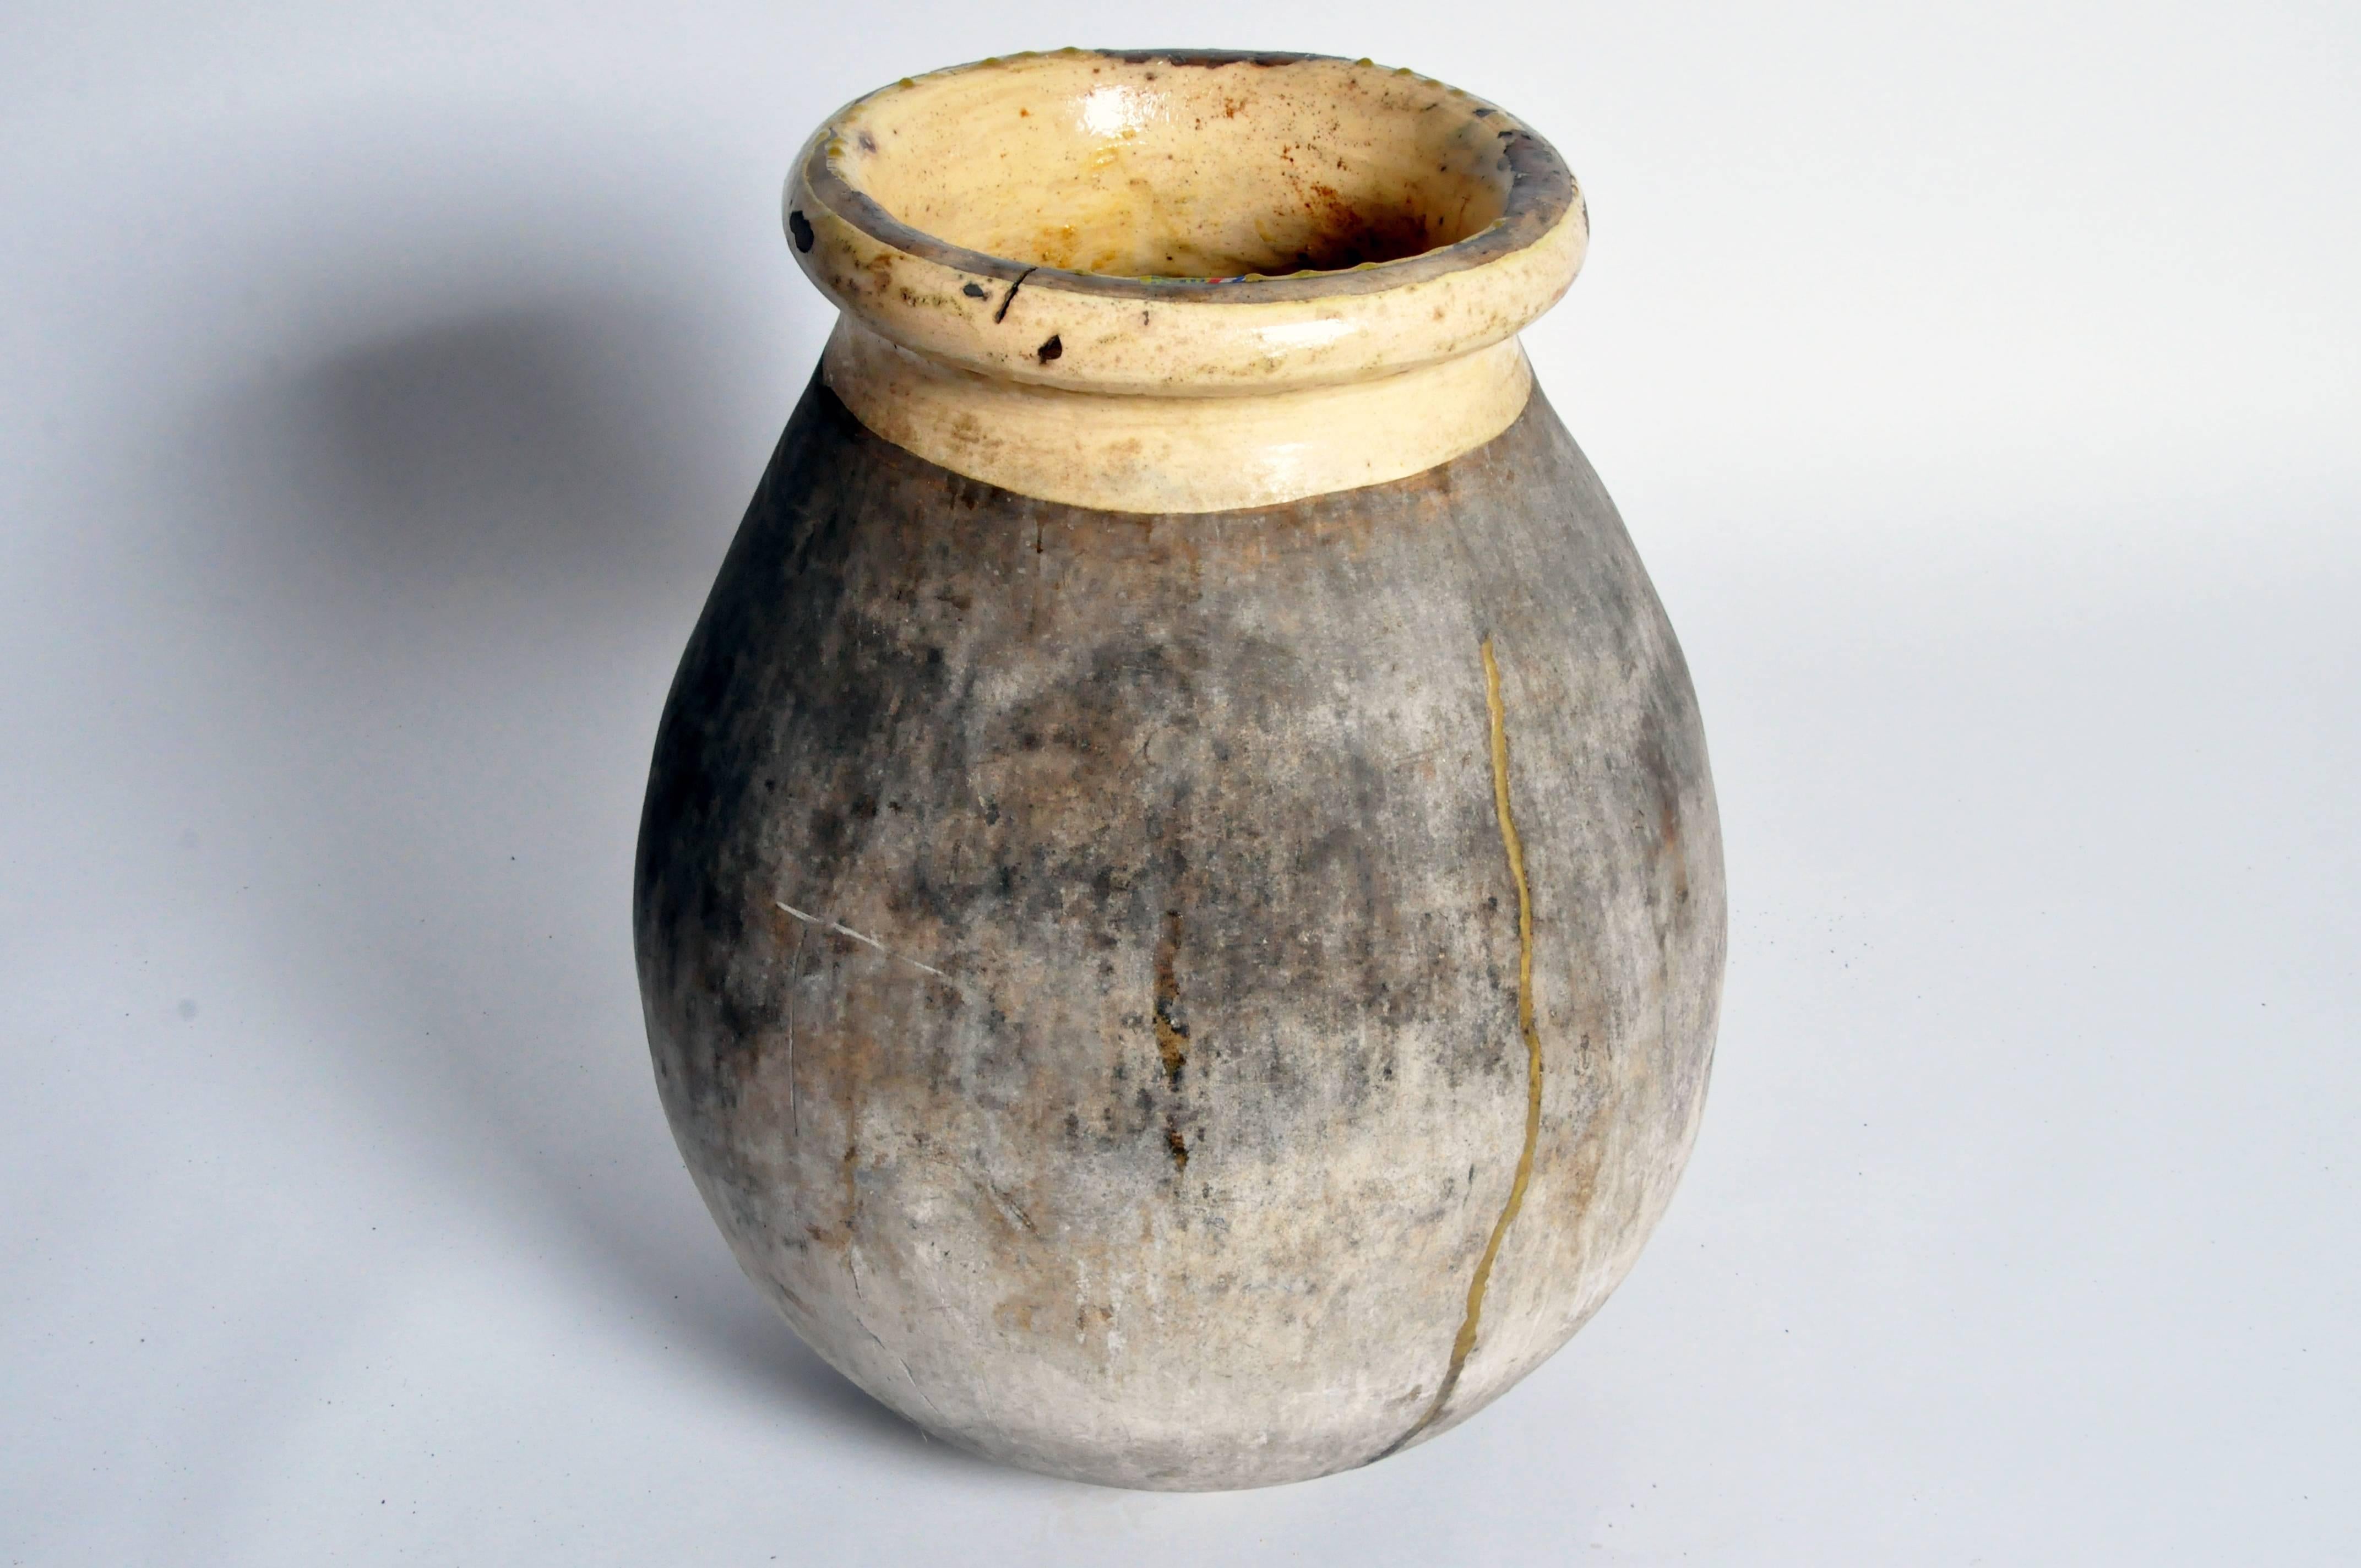 This olive jar is from Provence France and is made from glazed earthenware, circa 1880.